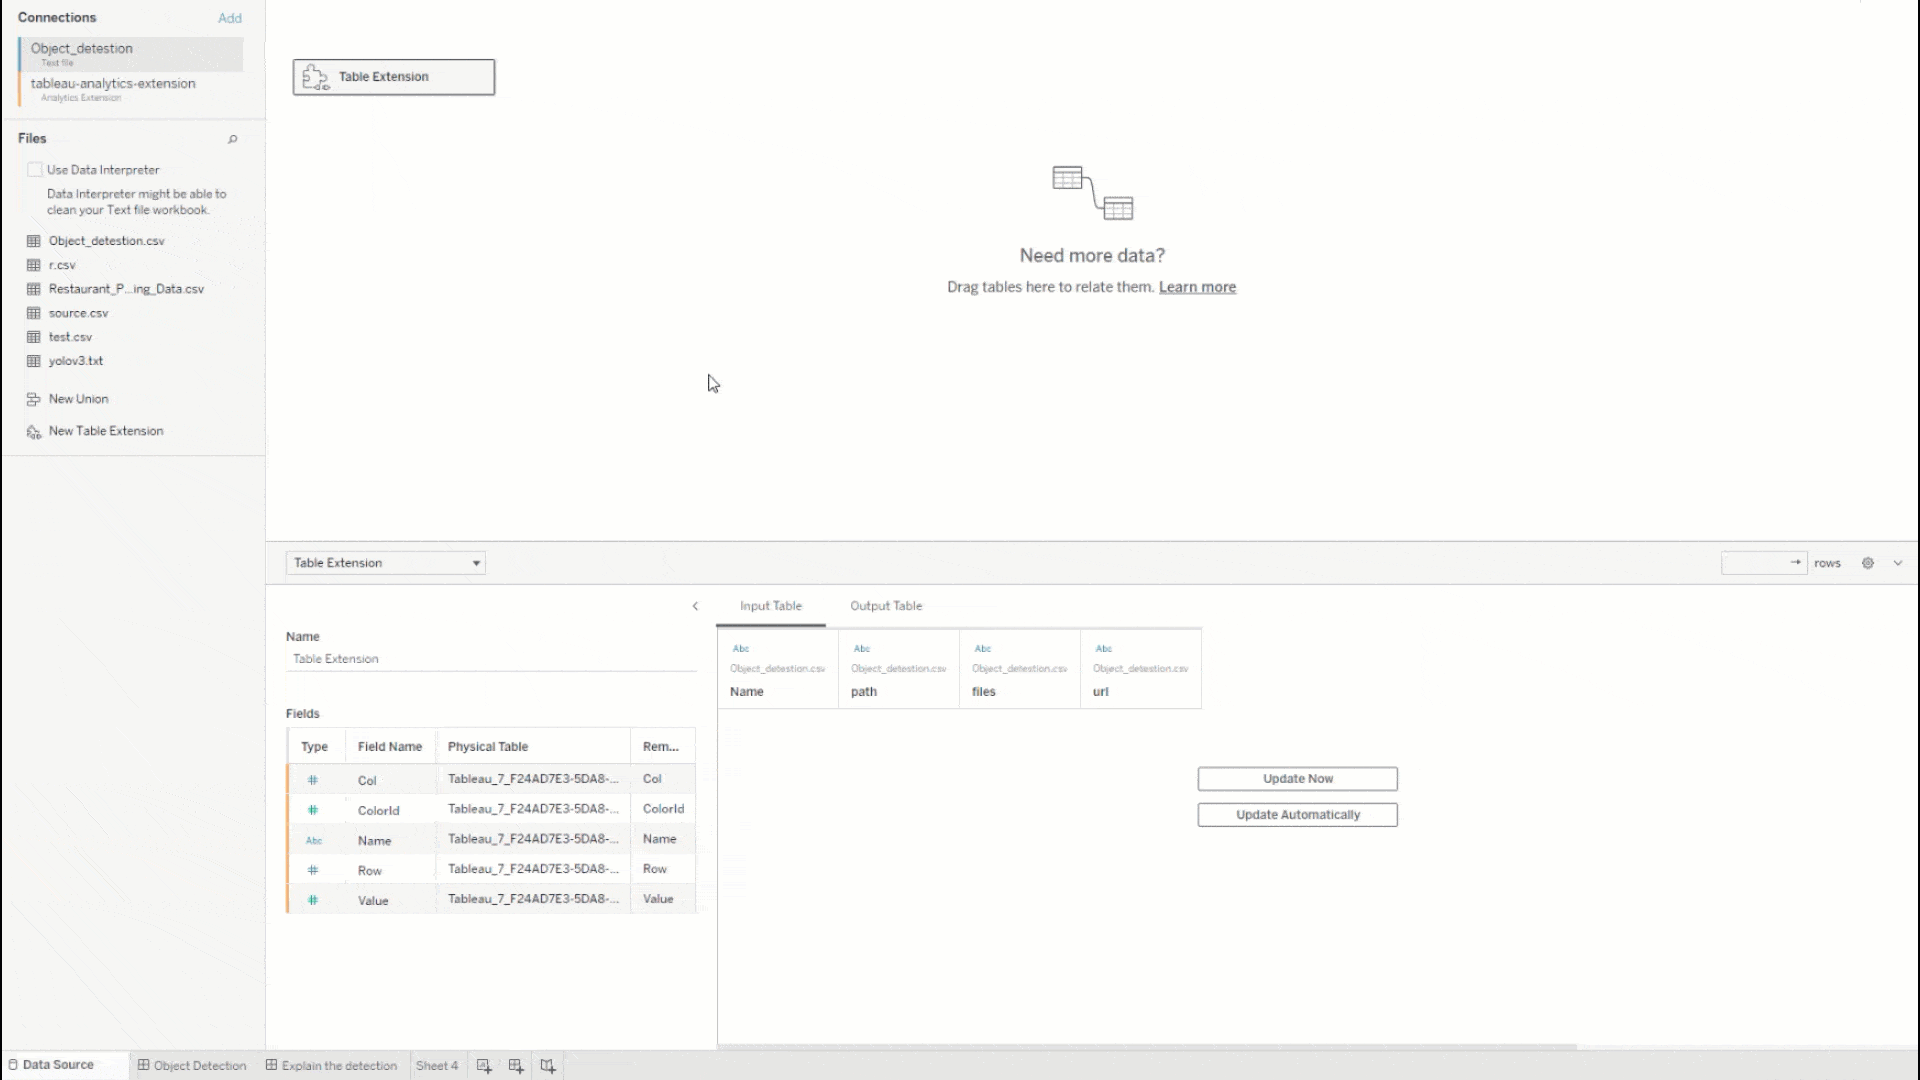 GIF of Table Extensions in the Tableau interface